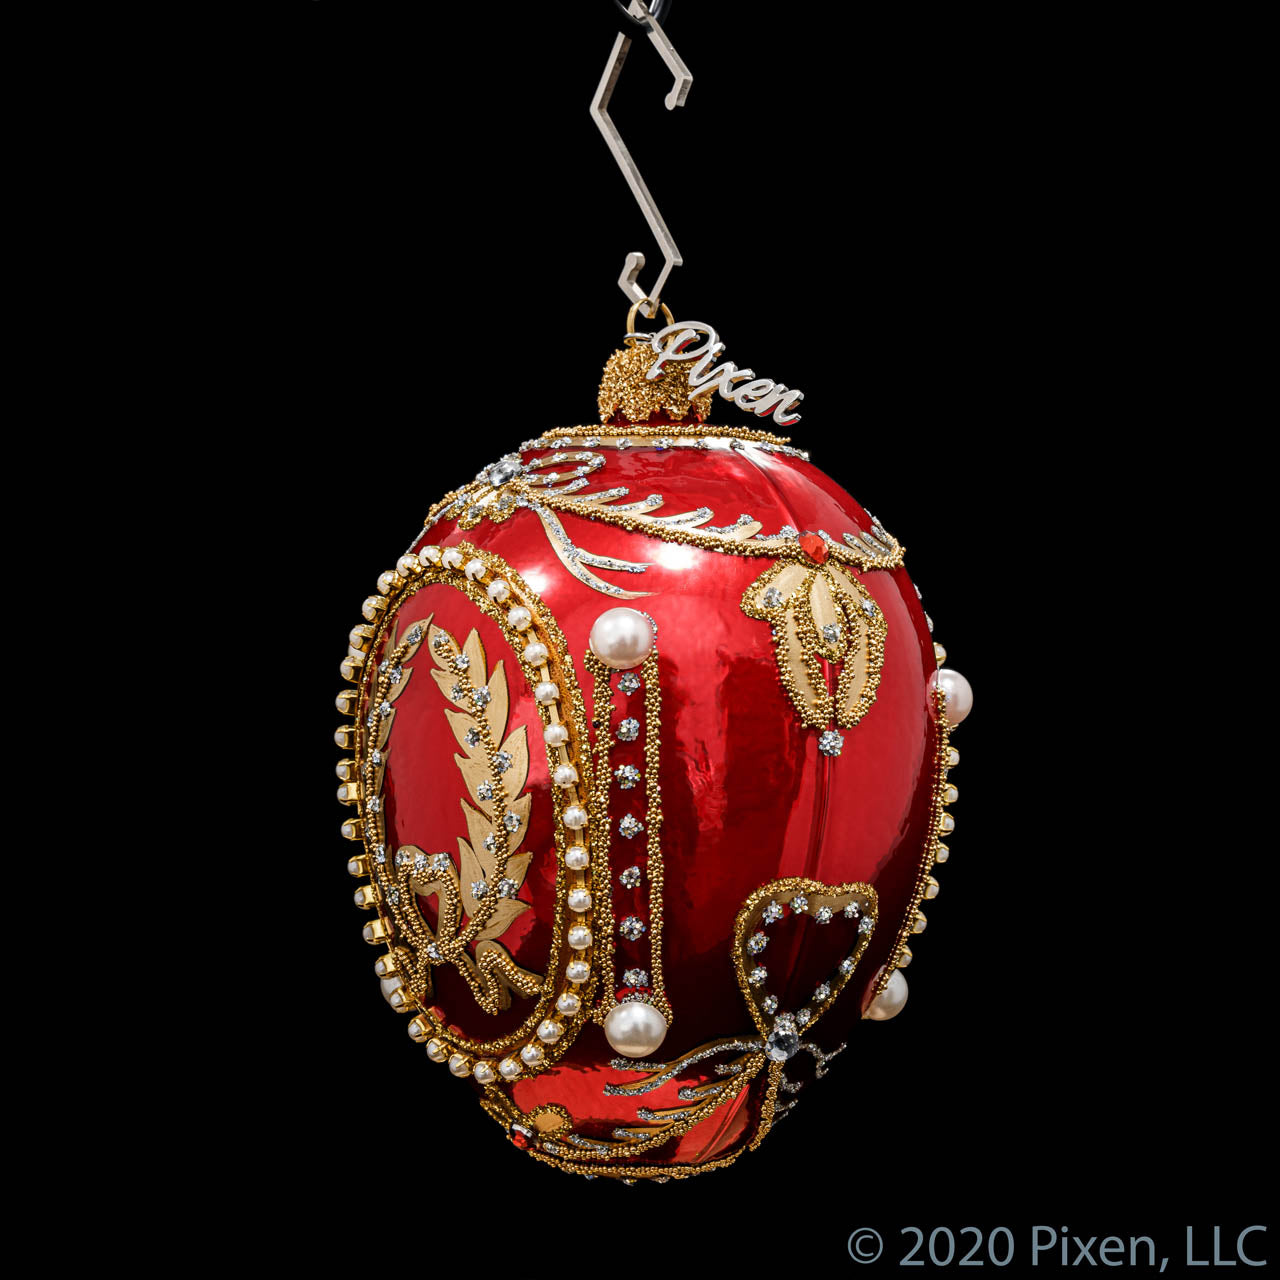 Innuendo Christmas Ornament by Pixen